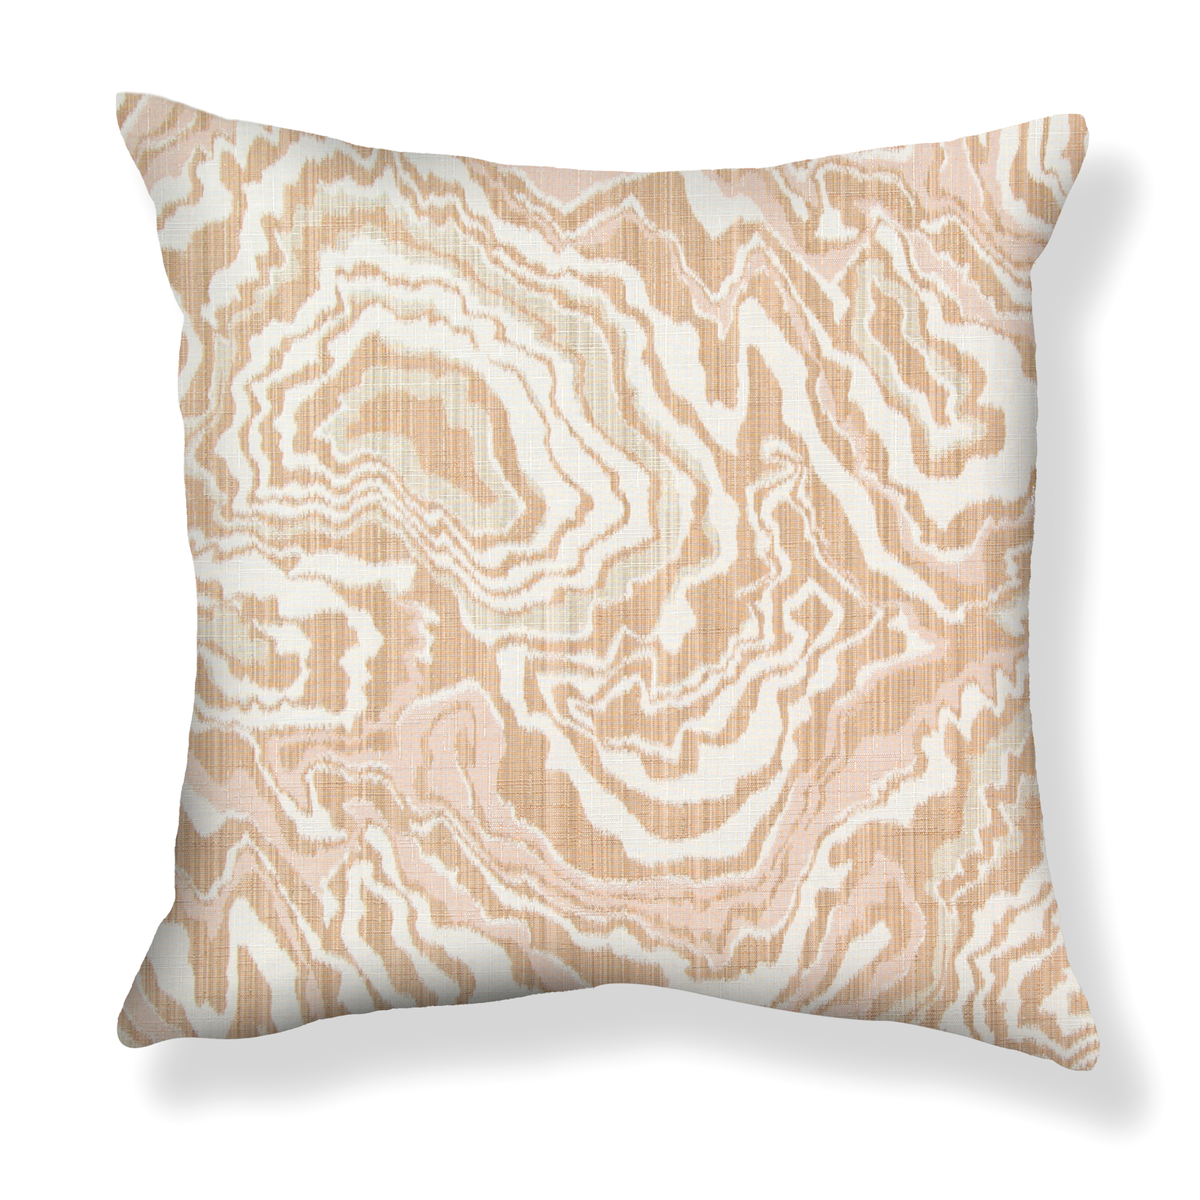 Marble Geode Pillow in Blushing Taupe